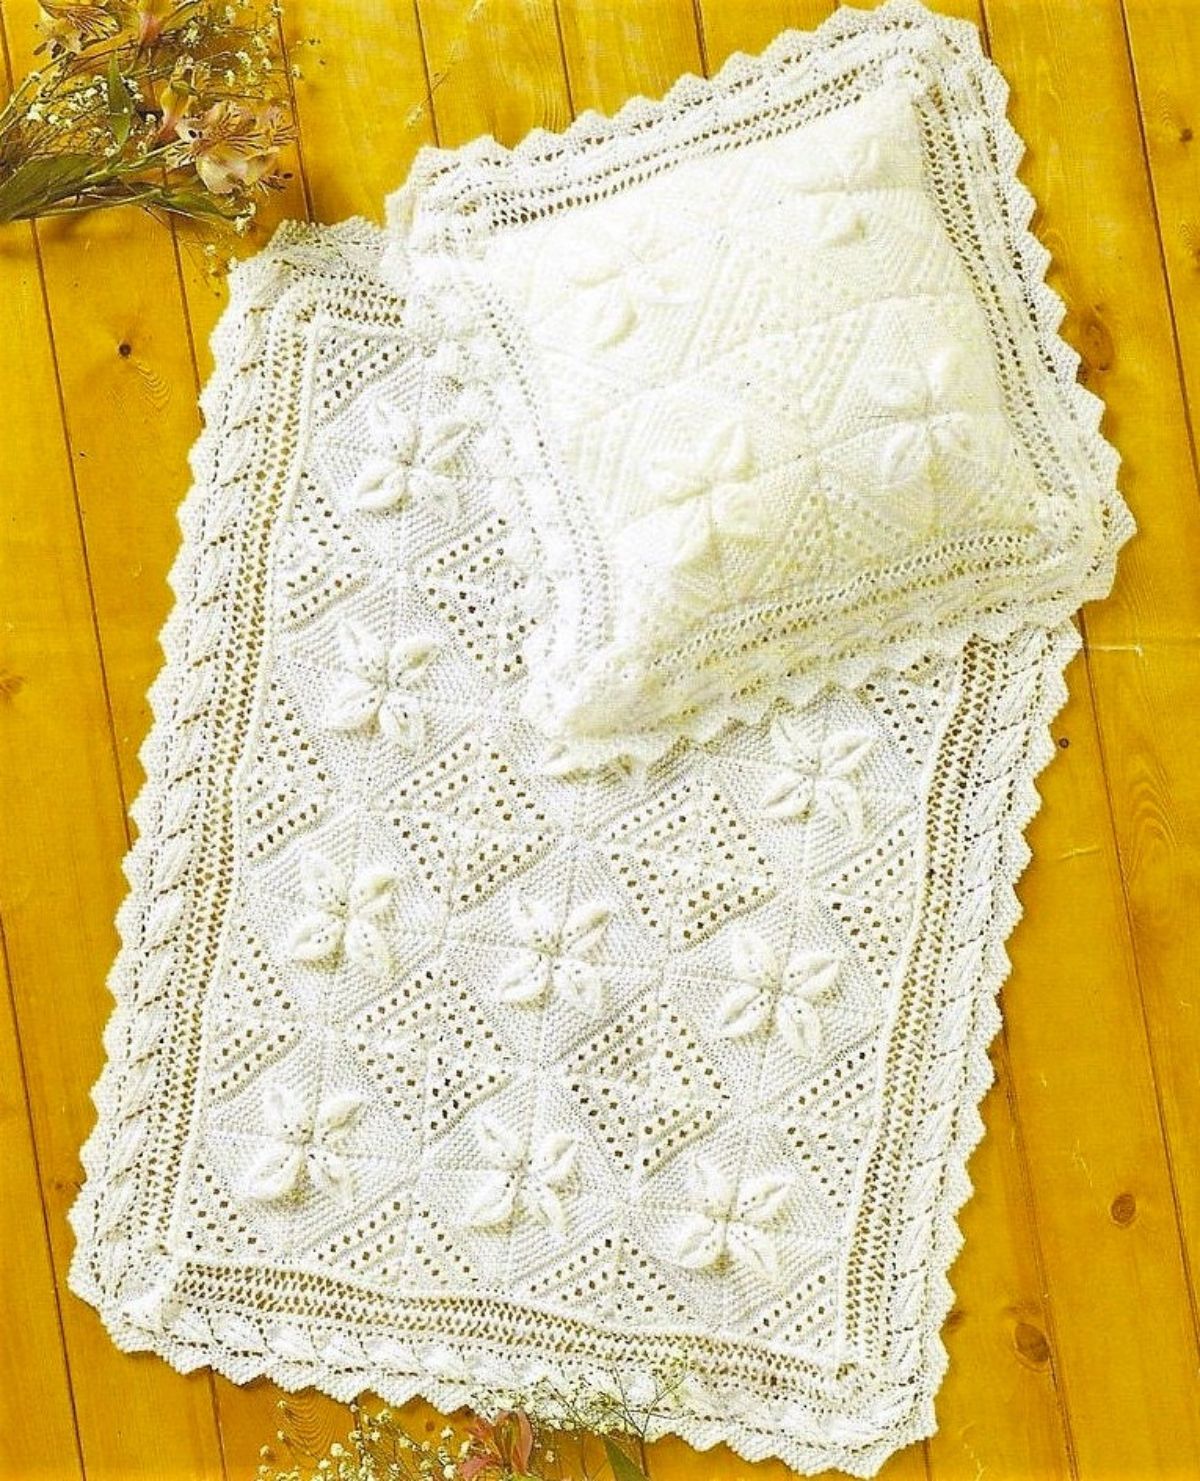 A white crochet lace baby blanket with a thick lace trim on all sides with a white cushion of the same design on top.